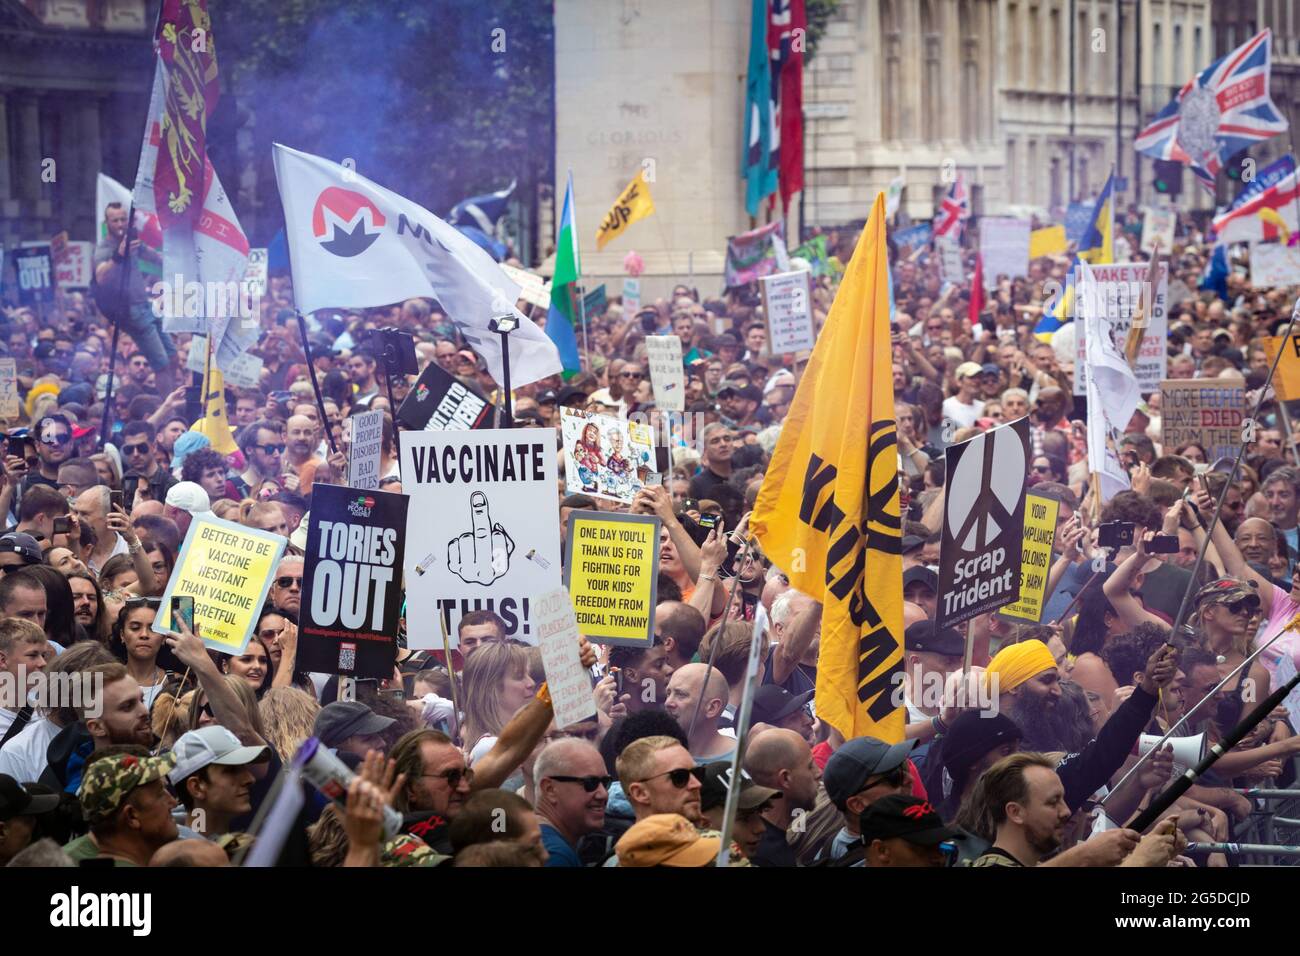 London, UK. 26th June, 2021. Protesters march down Whitehall past Downing Street. Thousands of people marched to raise their concerns regarding government legislation centred around vaccinations and freedom to travel. Credit: Andy Barton/Alamy Live News Stock Photo